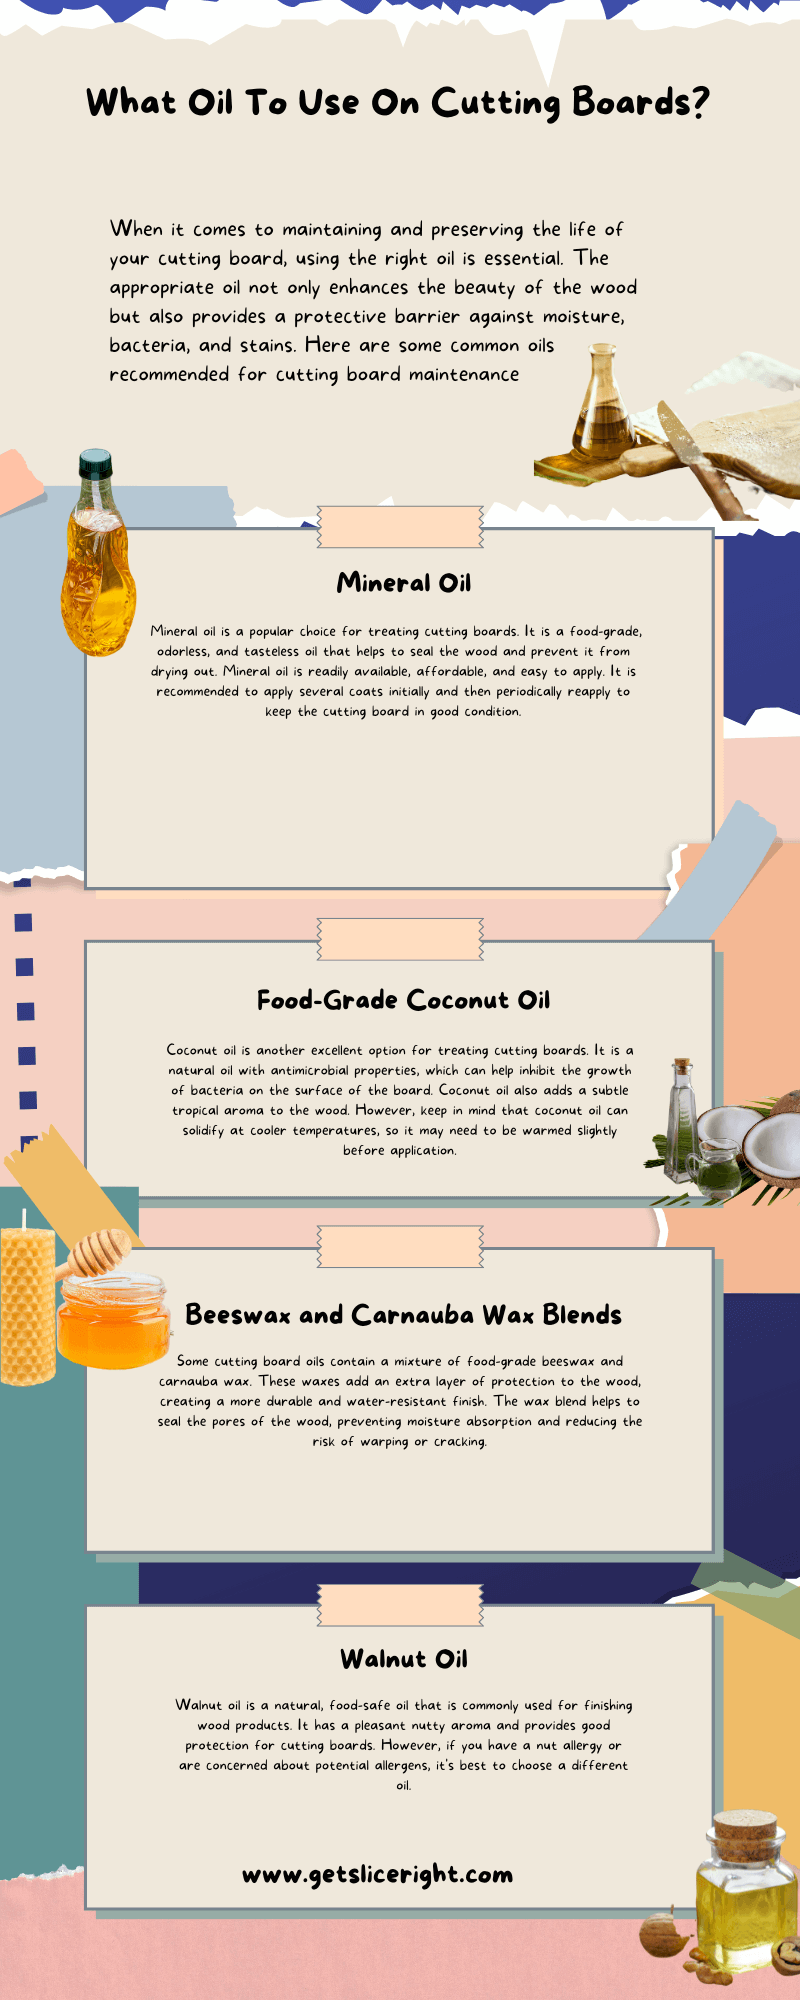 What oil to use on cutting boards - infographics